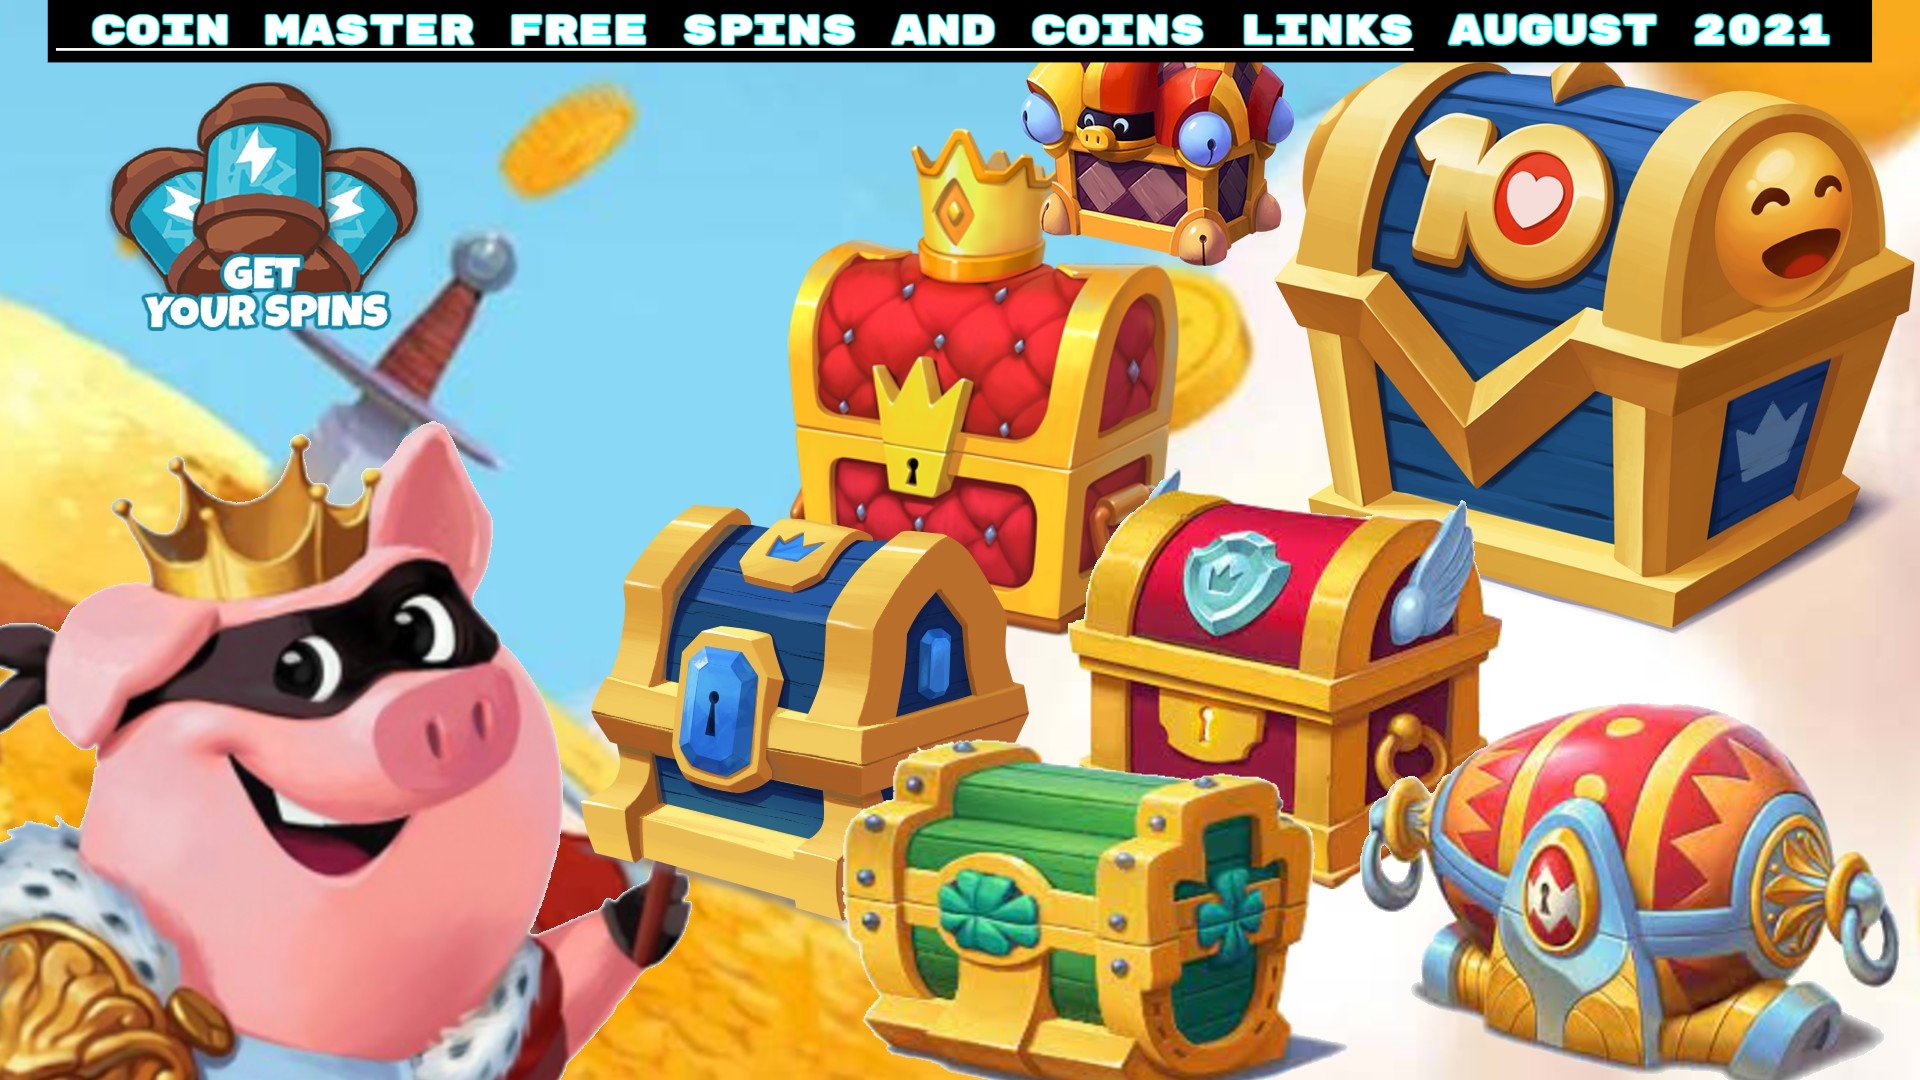 You are currently viewing Coin Master free spins and coins links 19 August 2021